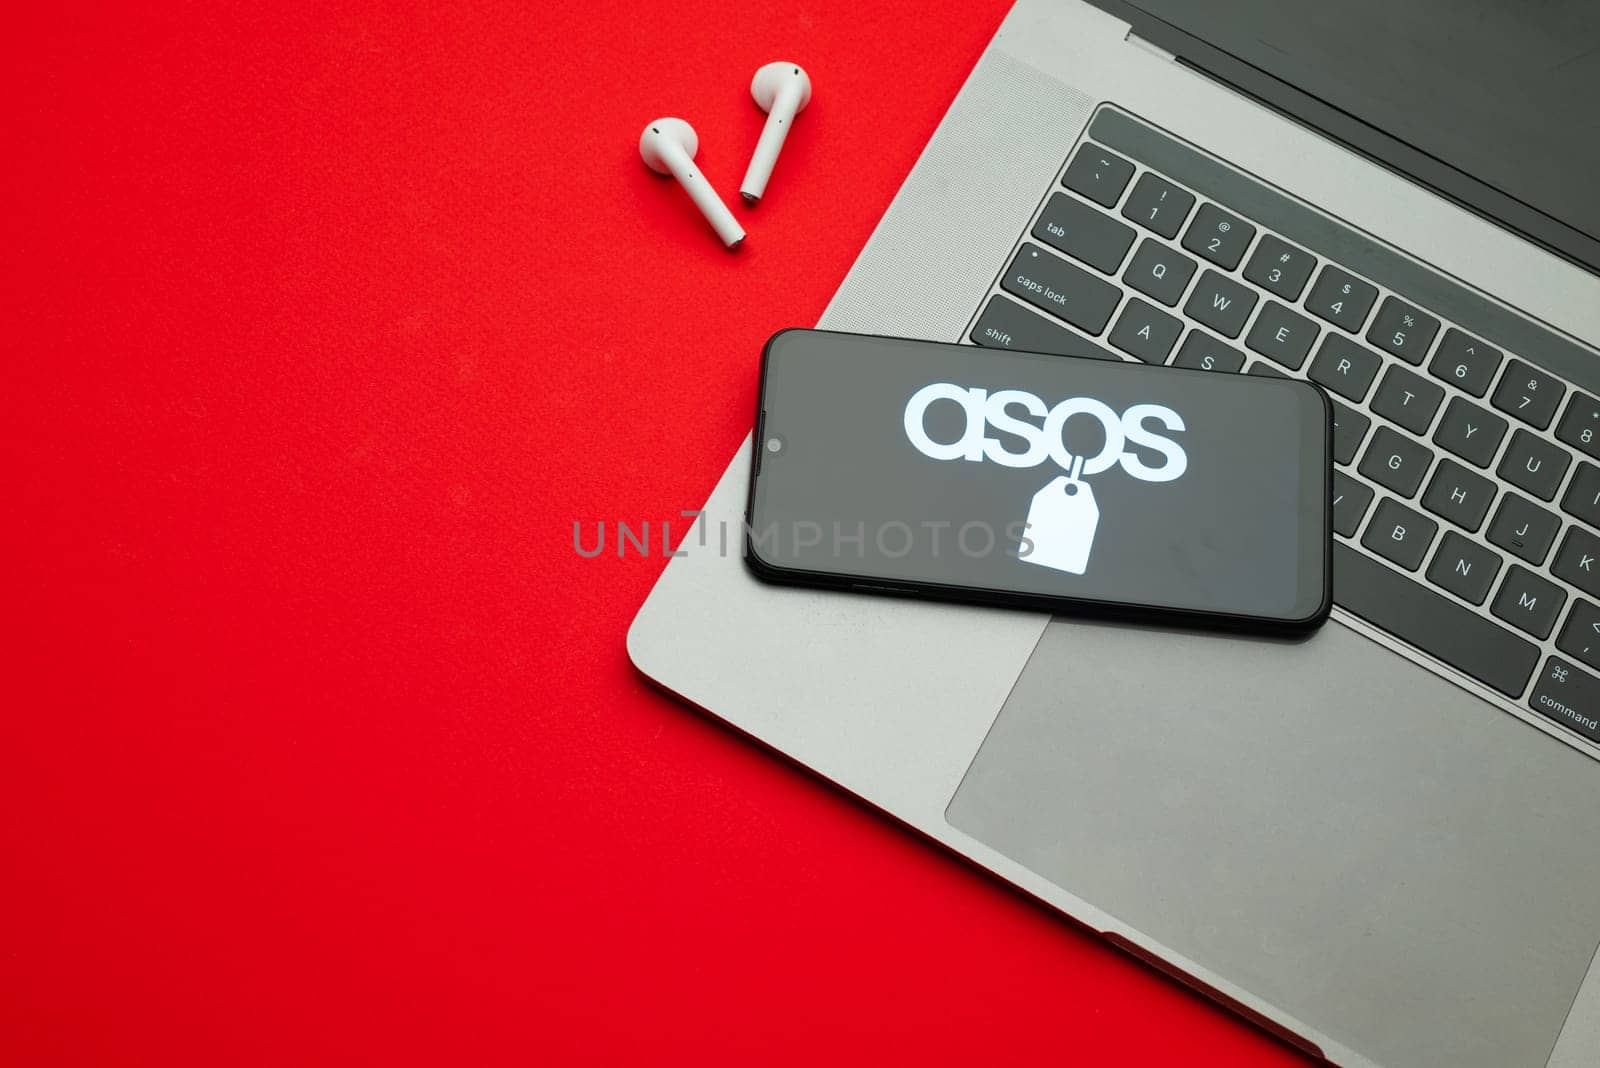 Tula, Russia - Jan 10, 2022: ASOS logo on smartphone screen on red background.